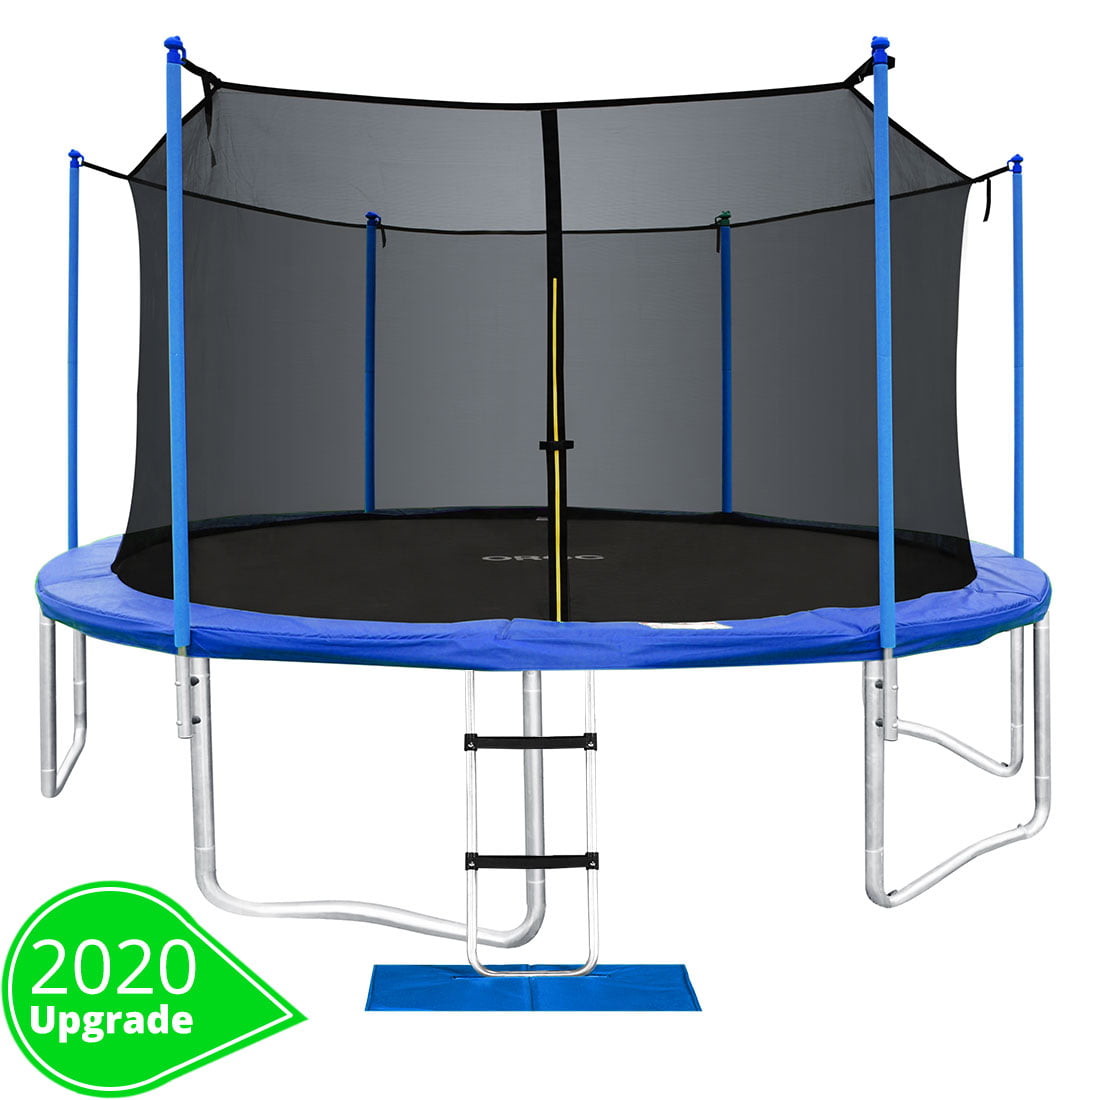 ORCC 2020 New Upgrade 15 14 12 10 FT Outdoor Trampoline,TUV Certificated Yard Trampoline with Enclosure Net Jumping Mat Spring Pad,All accessories for Kids Trampoline